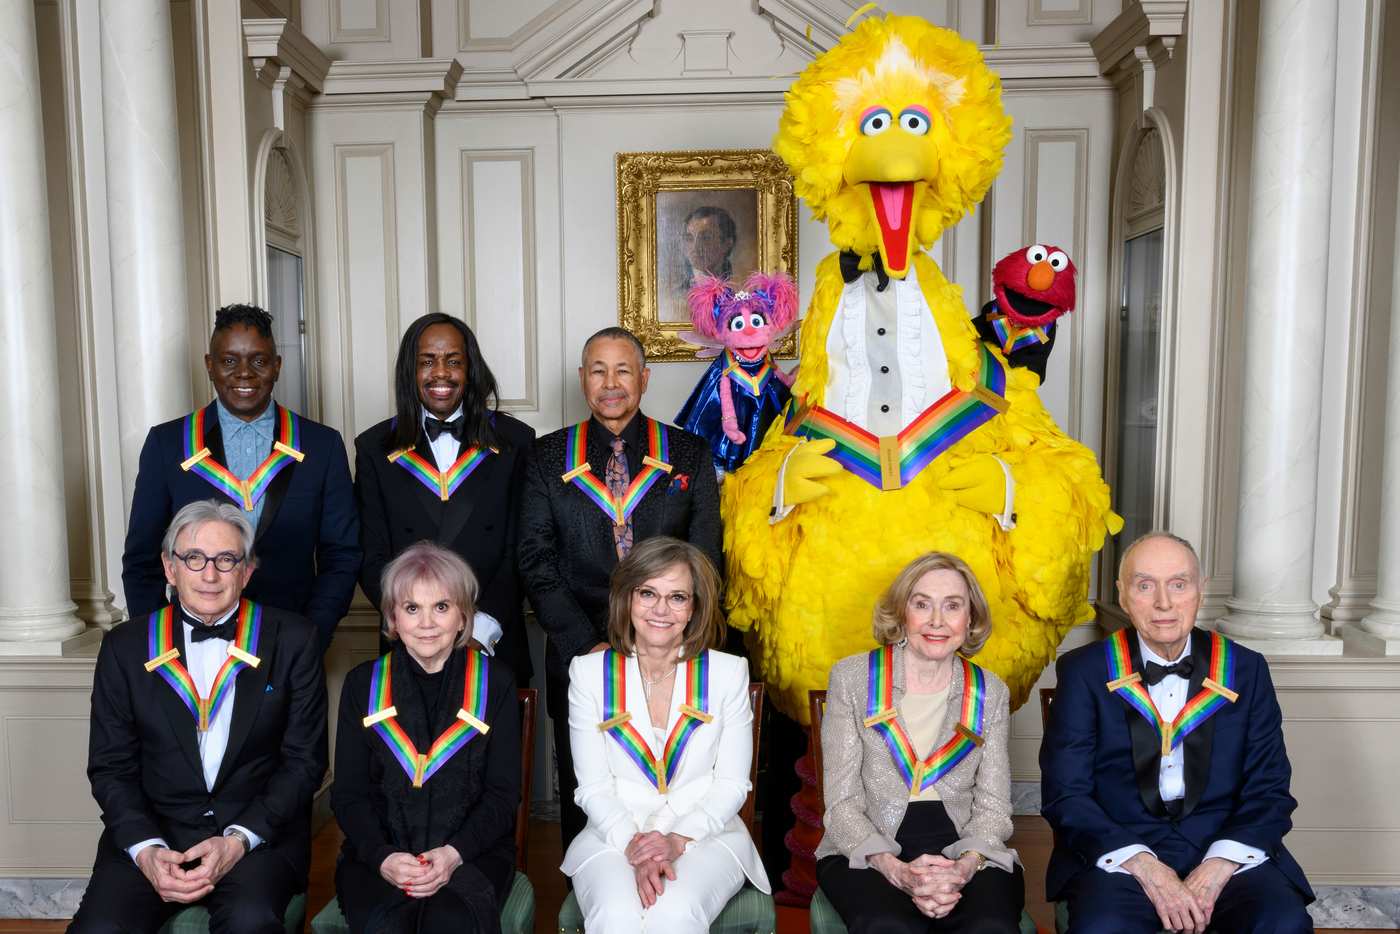 https://pixel.nymag.com/imgs/daily/vulture/2019/12/09/09-kennedy-center-honorees-big-bird.w700.h467.2x.jpg